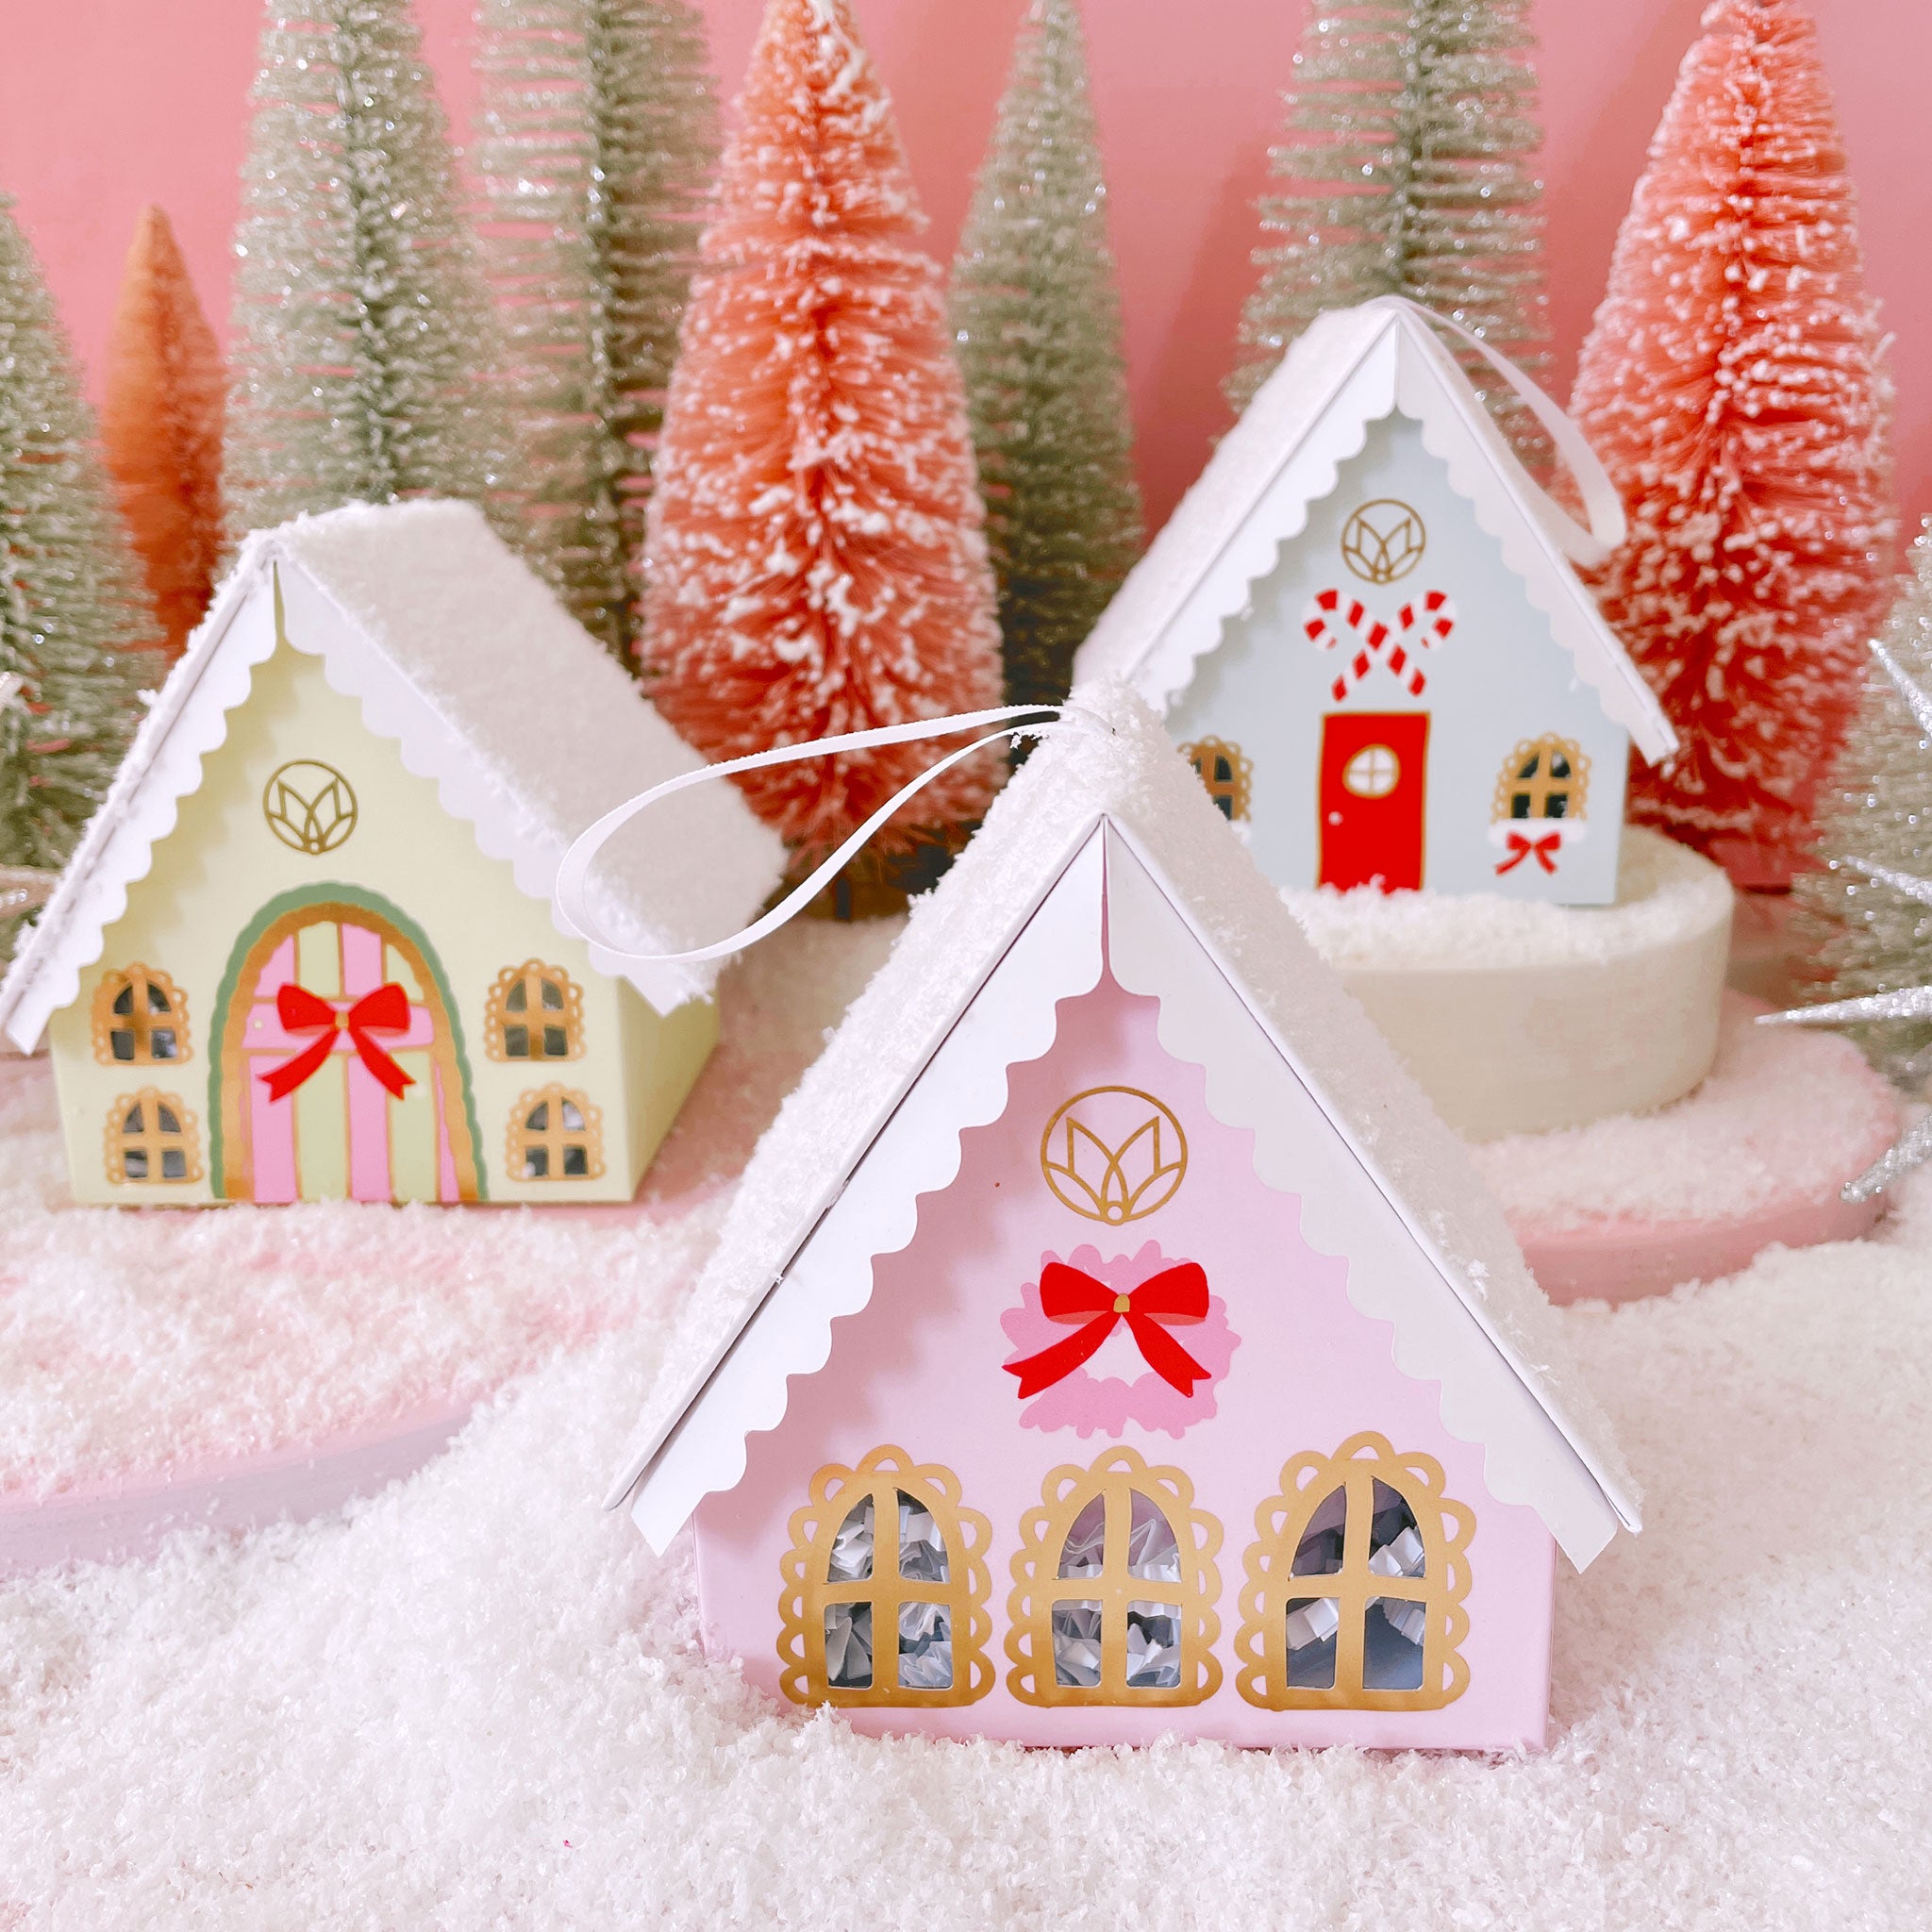 Green, pink and blue holiday cottages that is home to a blue bath bomb. The cardboard cottage comes with a ribbon loop at the top that makes it double as an ornament. Surrounded by silver and pink tinsel trees on snow.